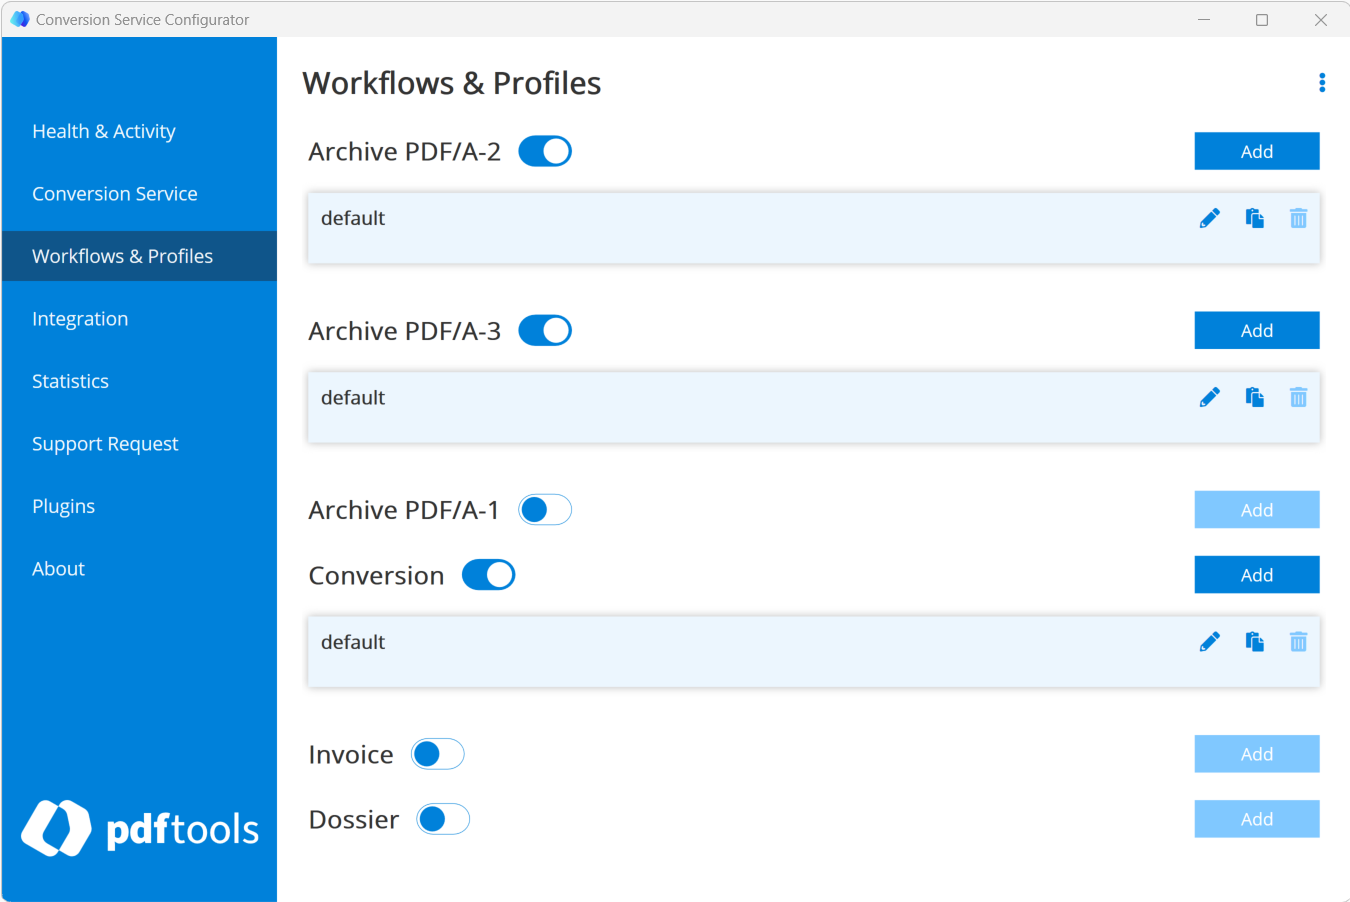 Workflows &amp; Profiles tab of the Conversion Service Configurator